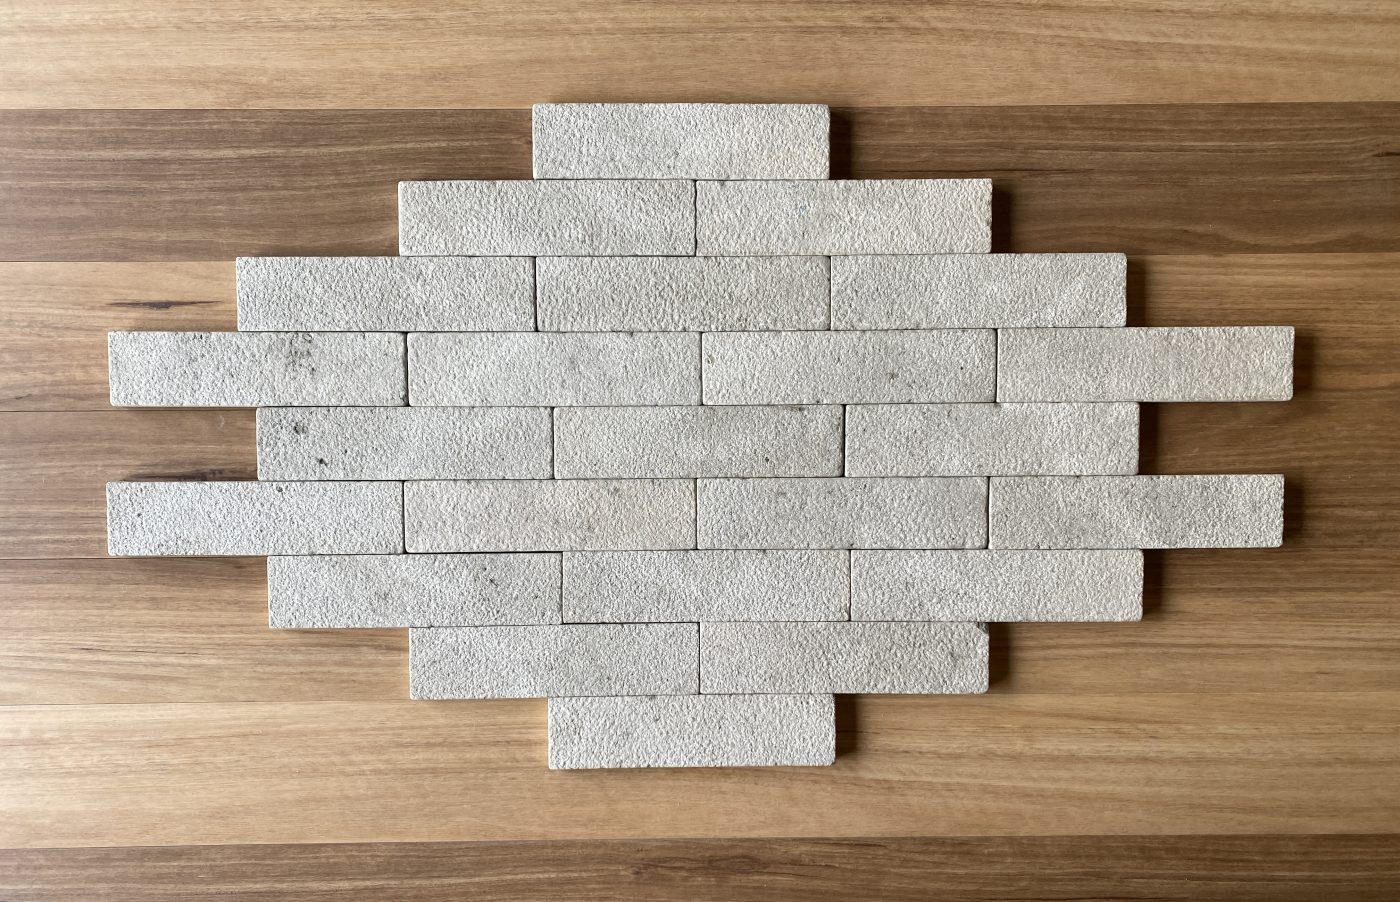 MADDISON-BUSH-HAMMERED-TUMBLED-LIMESTONE-BATON_RMS-TRADERS_NATURAL-STONE-PAVER-SUPPLIER-MELBOURNE-12-scaled